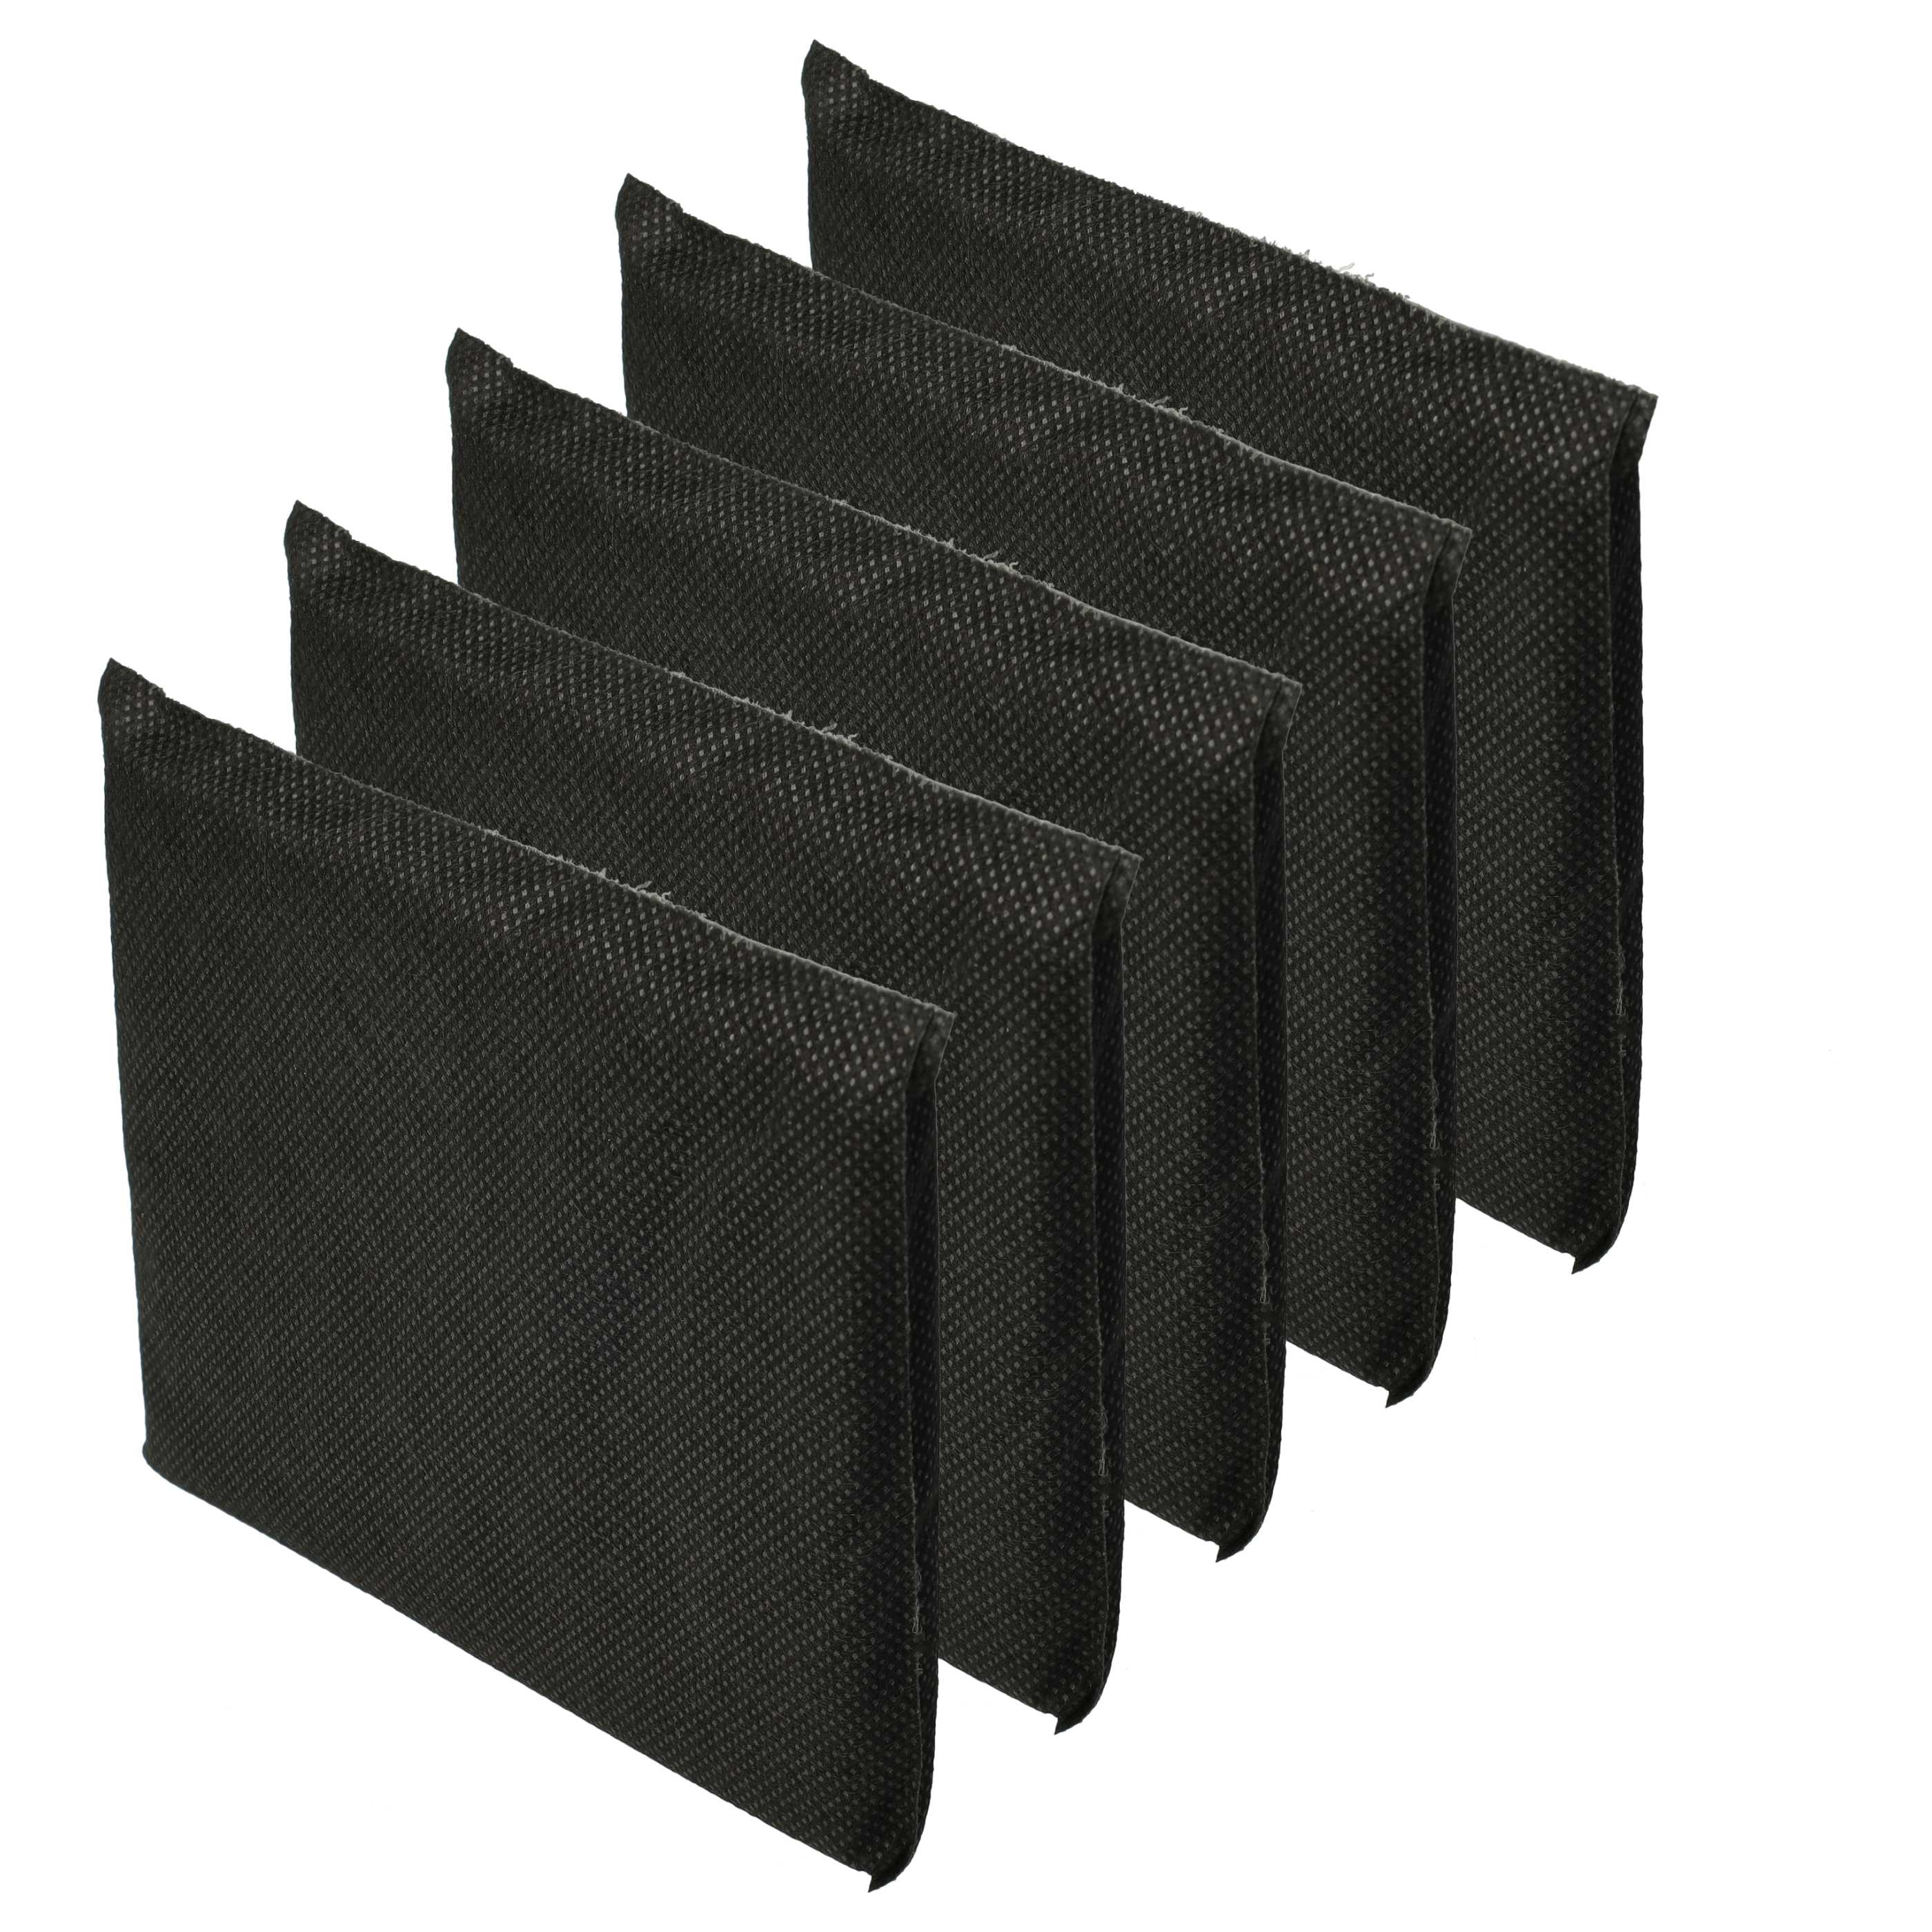 5x Air Filter replaces AEG/Electrolux 2081625036, 2081625010 for Juno Fridge - Activated Carbon